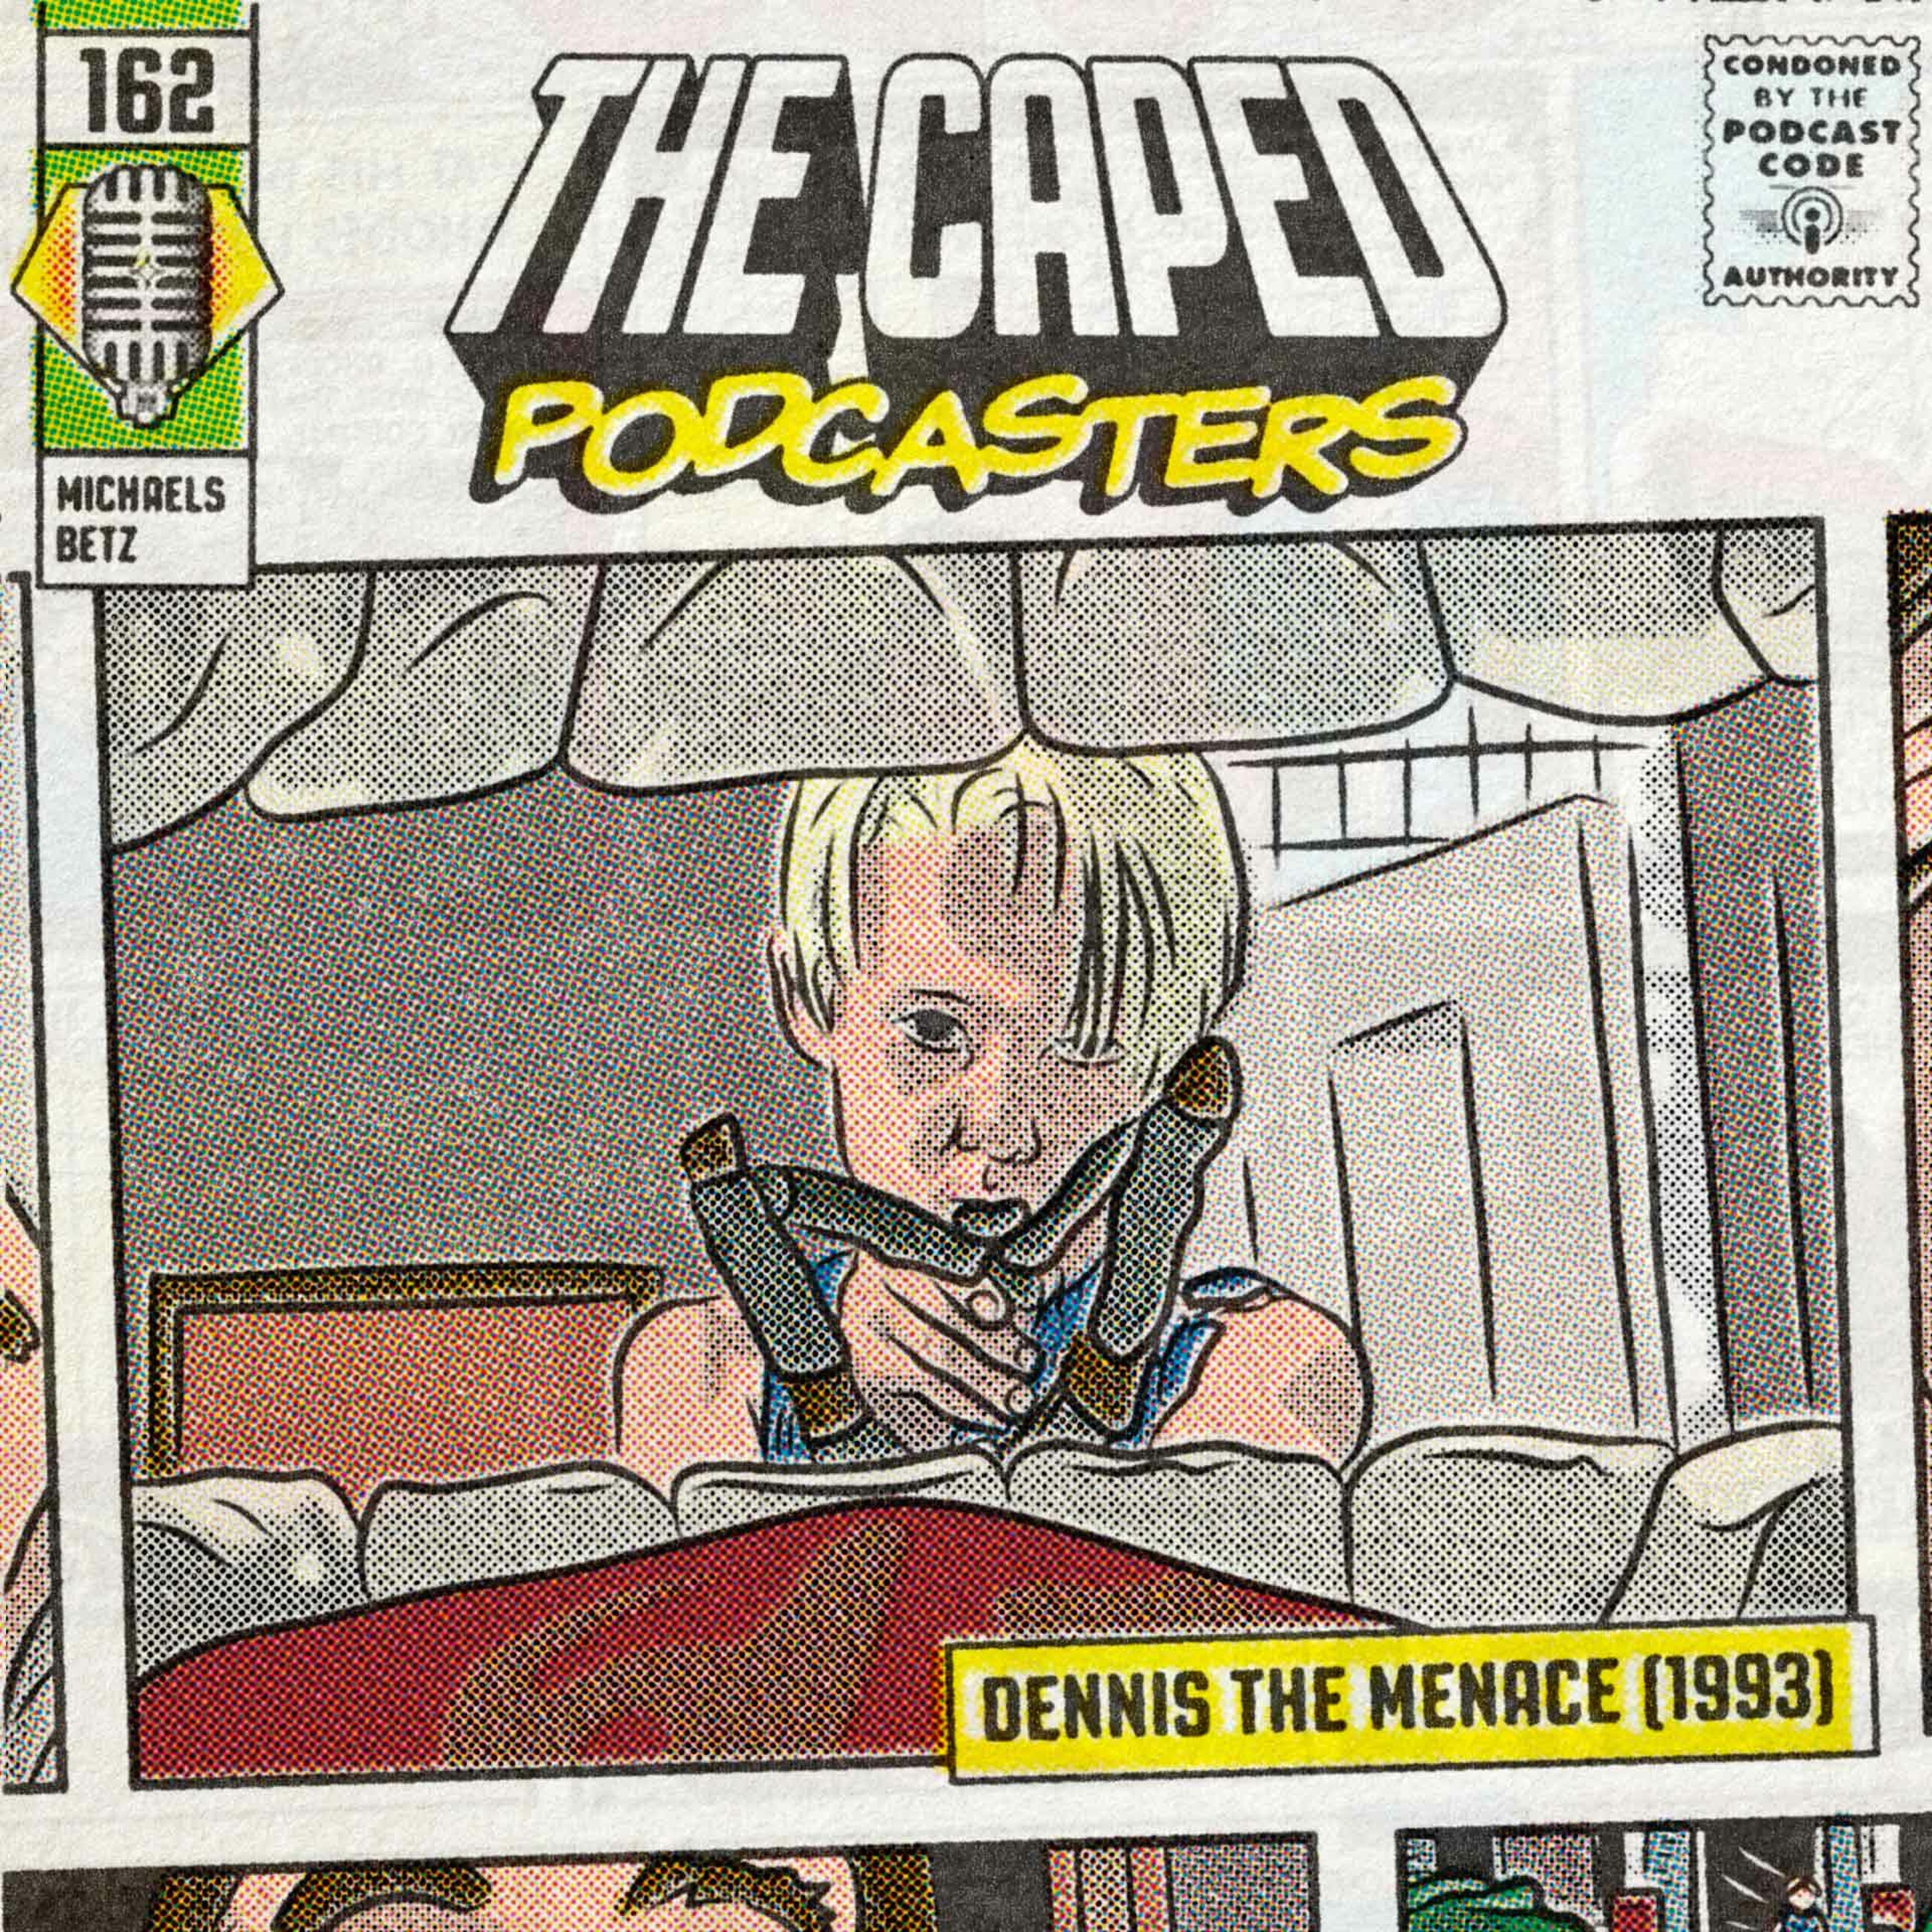 Caped Podcasters #162 - Dennis the Menace (1993)